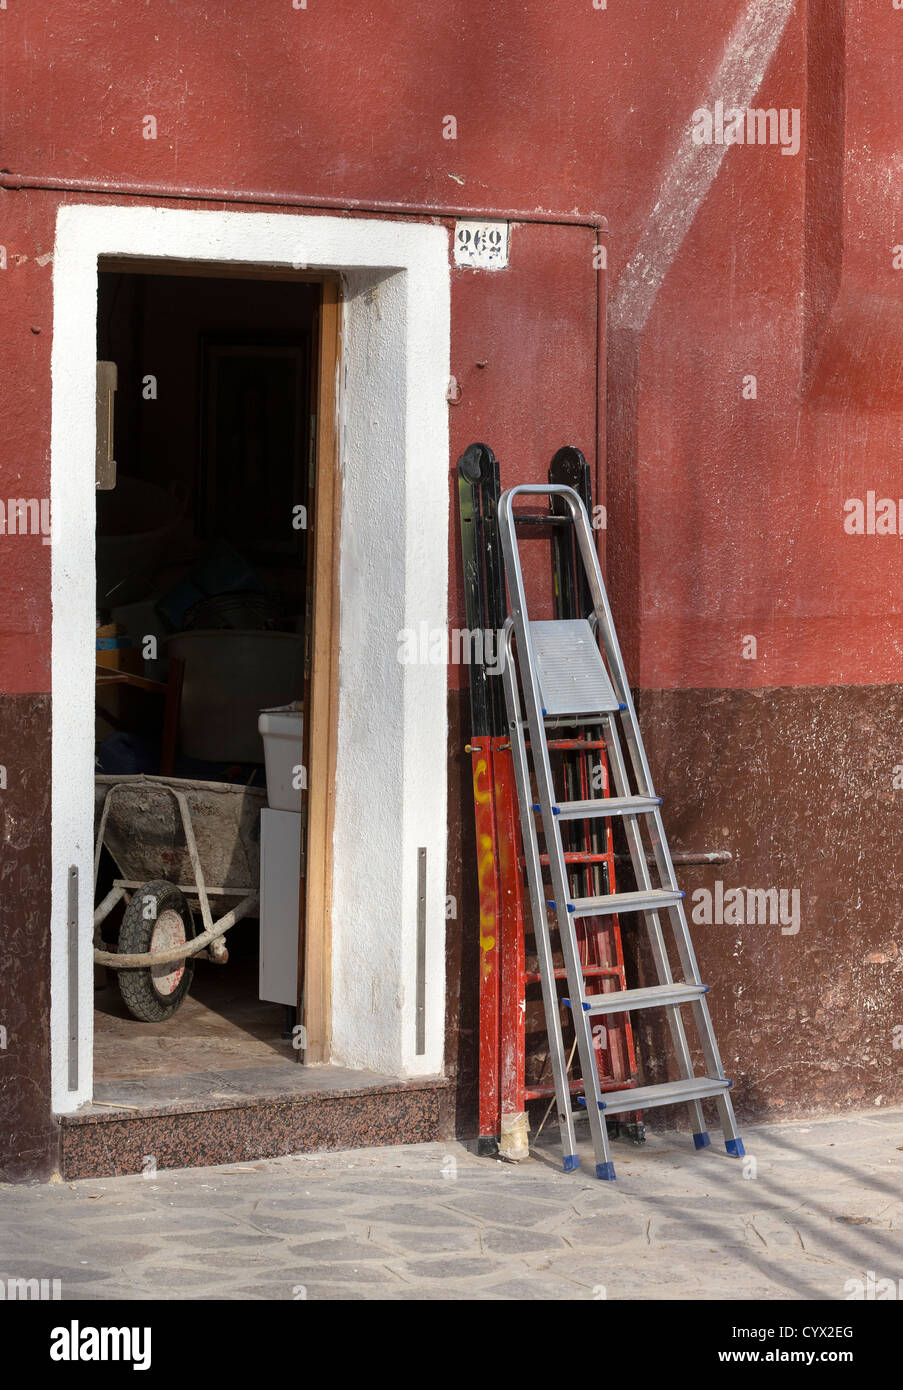 Stepladders leaning against a wall in Burano, Venice, with a wheelbarrow visible inside the doorway indicating builders at work Stock Photo